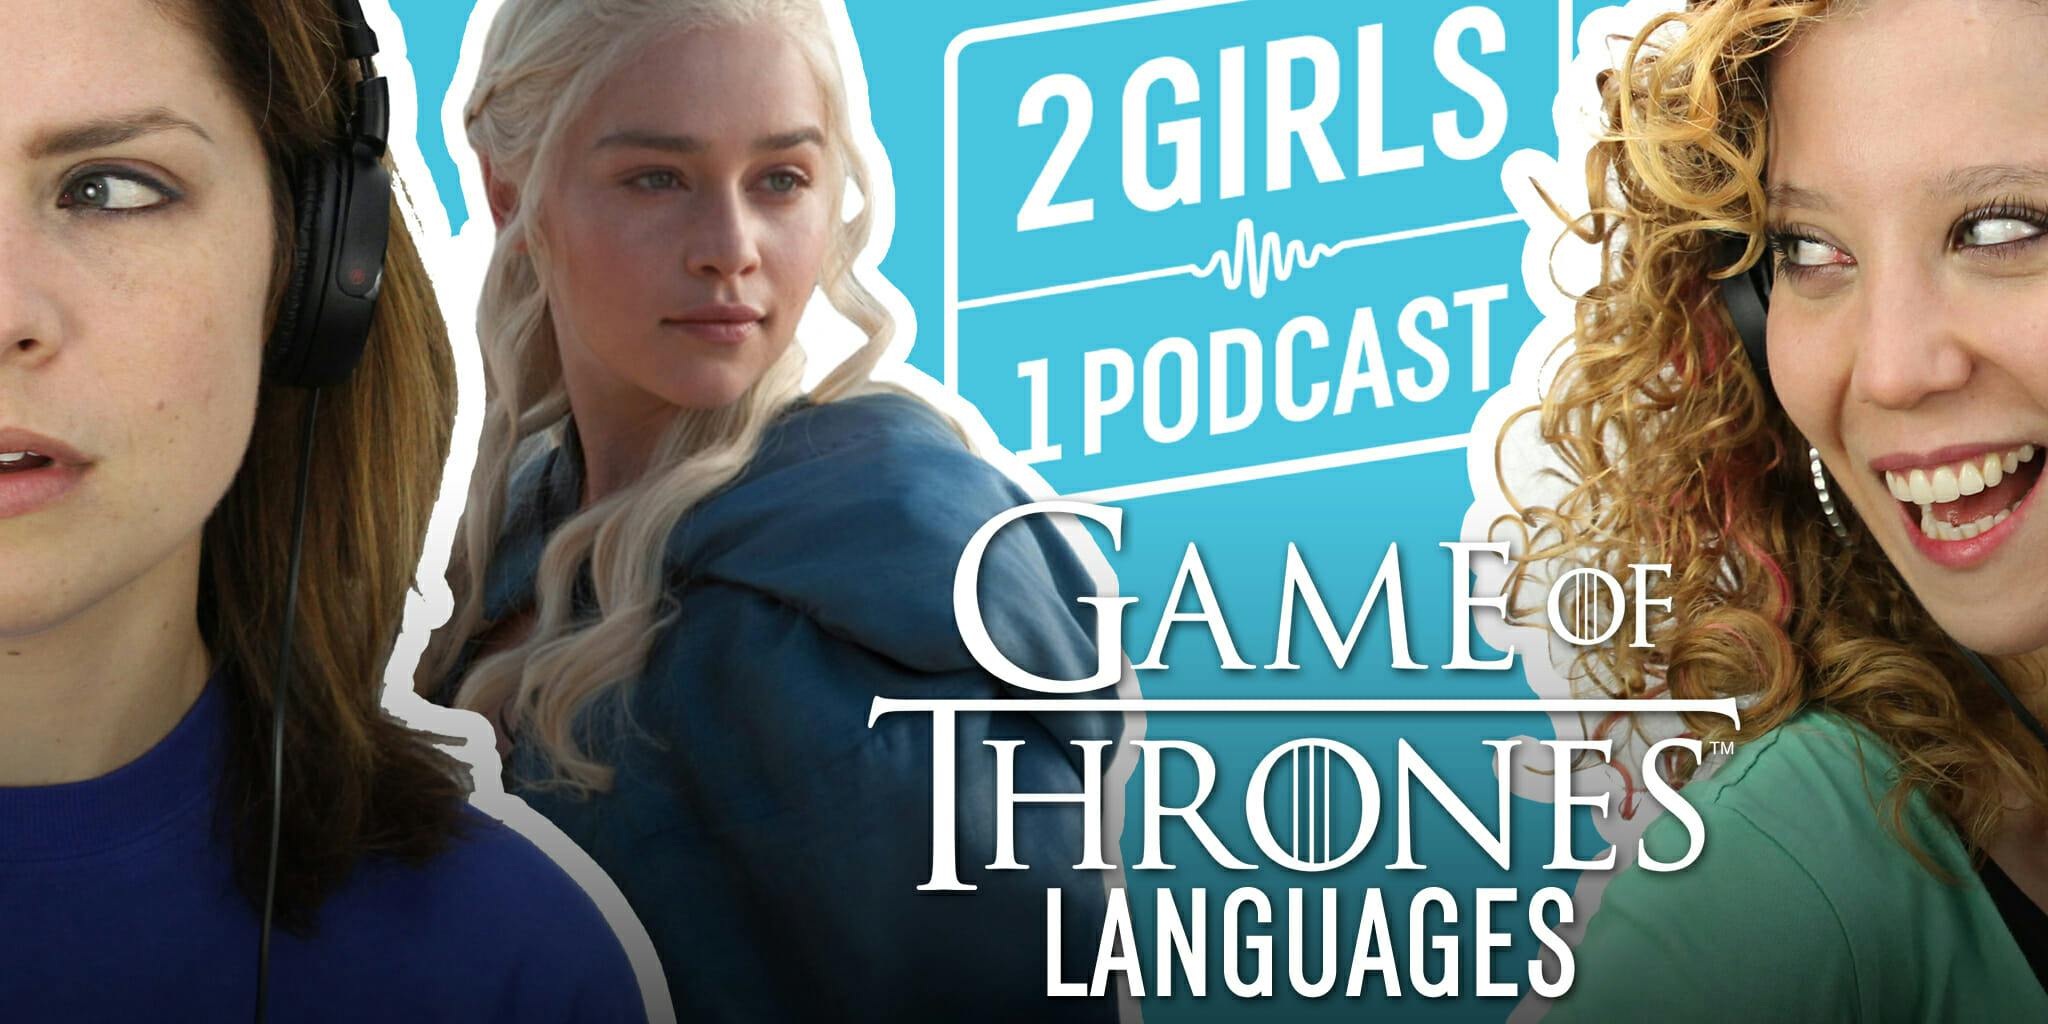 2 Girls 1 Podcast Game of Thrones